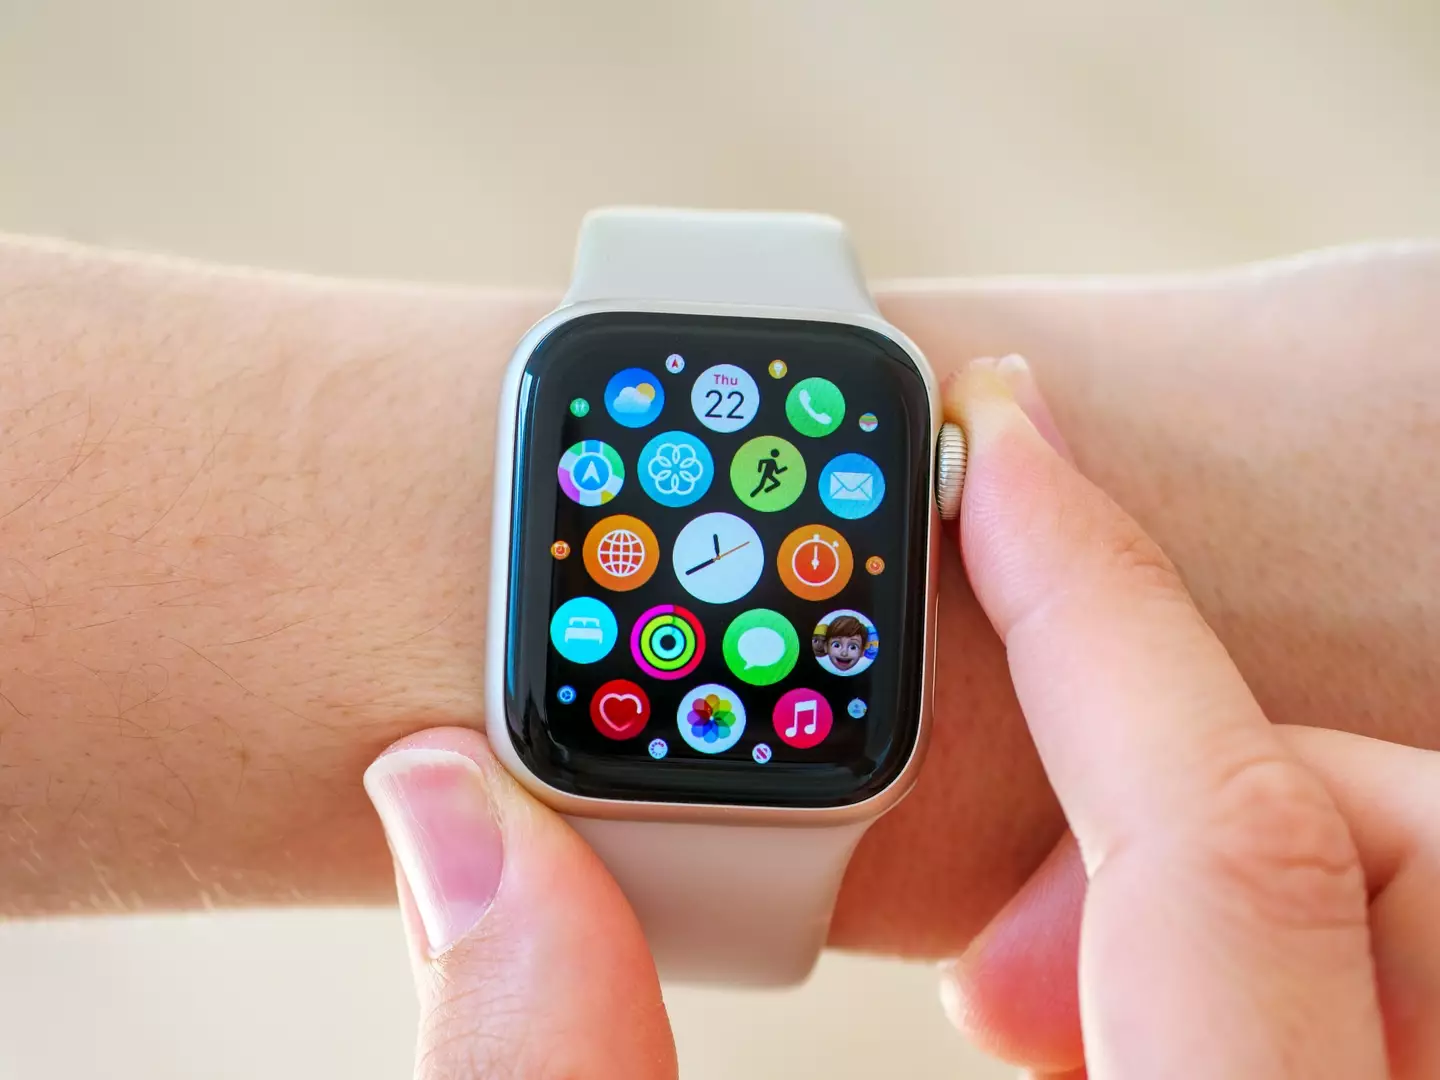 Apple Watch users have claimed the latest update has ruined their battery.